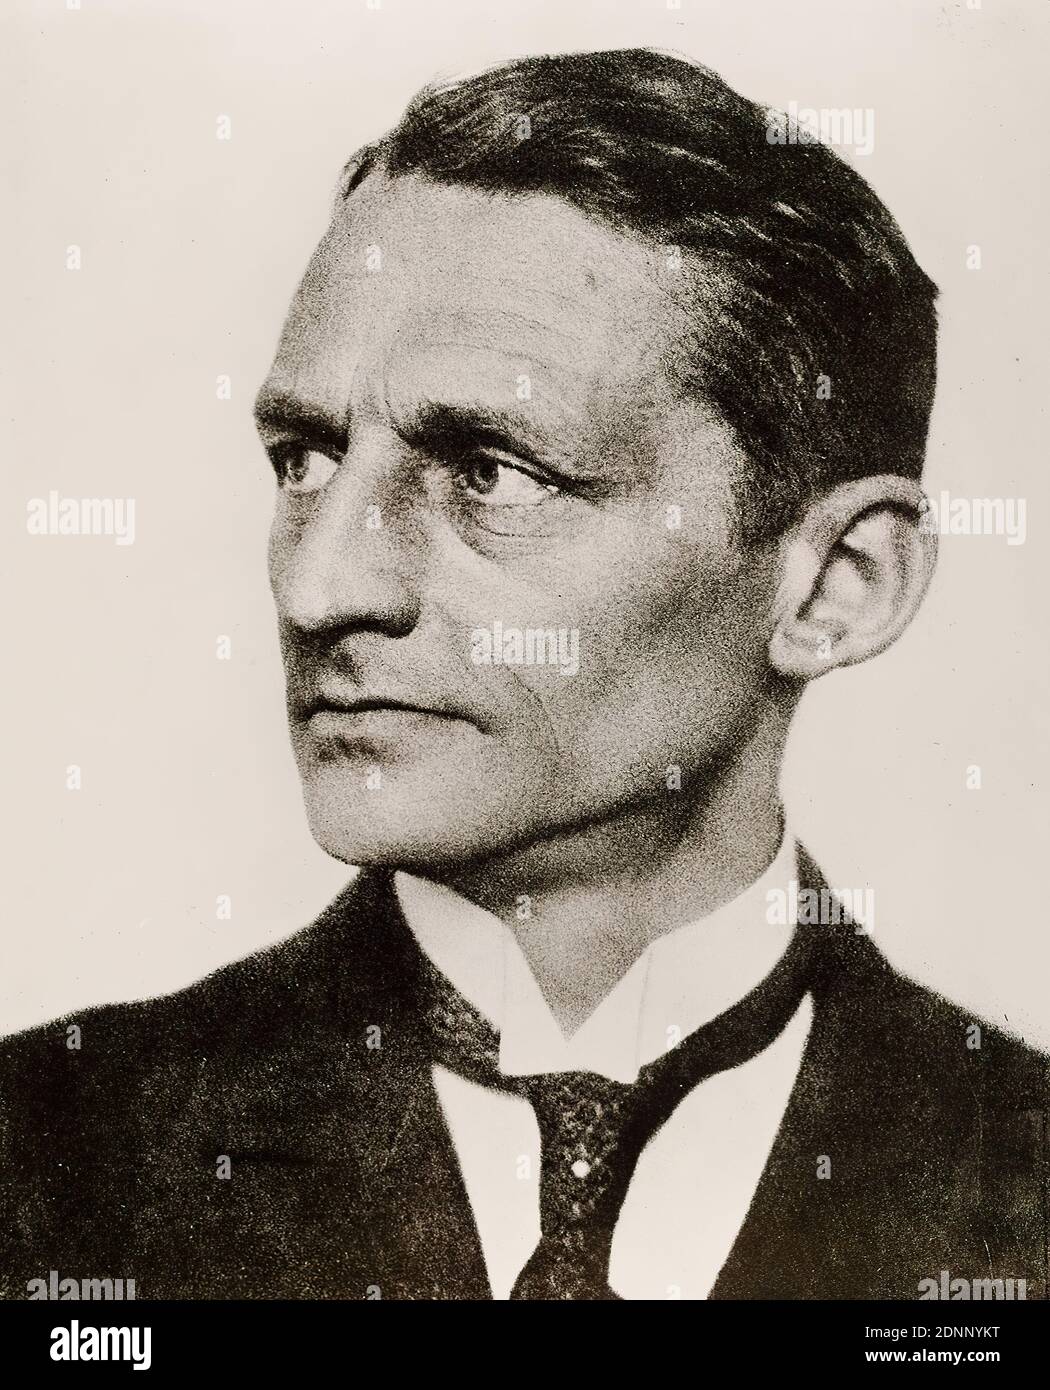 Hugo Erfurth, Max Sauerlandt, silver gelatin paper, black and white positive process, image size: height: 29.3 cm; width: 23.7 cm, inscribed: verso and: in lead: 38760, stamp: verso and in the middle: copyright stamp of the Staatliche Landesbildstelle Hamburg probably used to mark press photos, portrait photography, portrait, man, humanities, At the beginning of the 20th century, Hugo Erfurth was one of the most famous professional photographers in Germany, along with Rudolph Dührkoop and Nicola Perscheid. After completing an apprenticeship as a photographer, he opened his own studio in Dresde Stock Photo